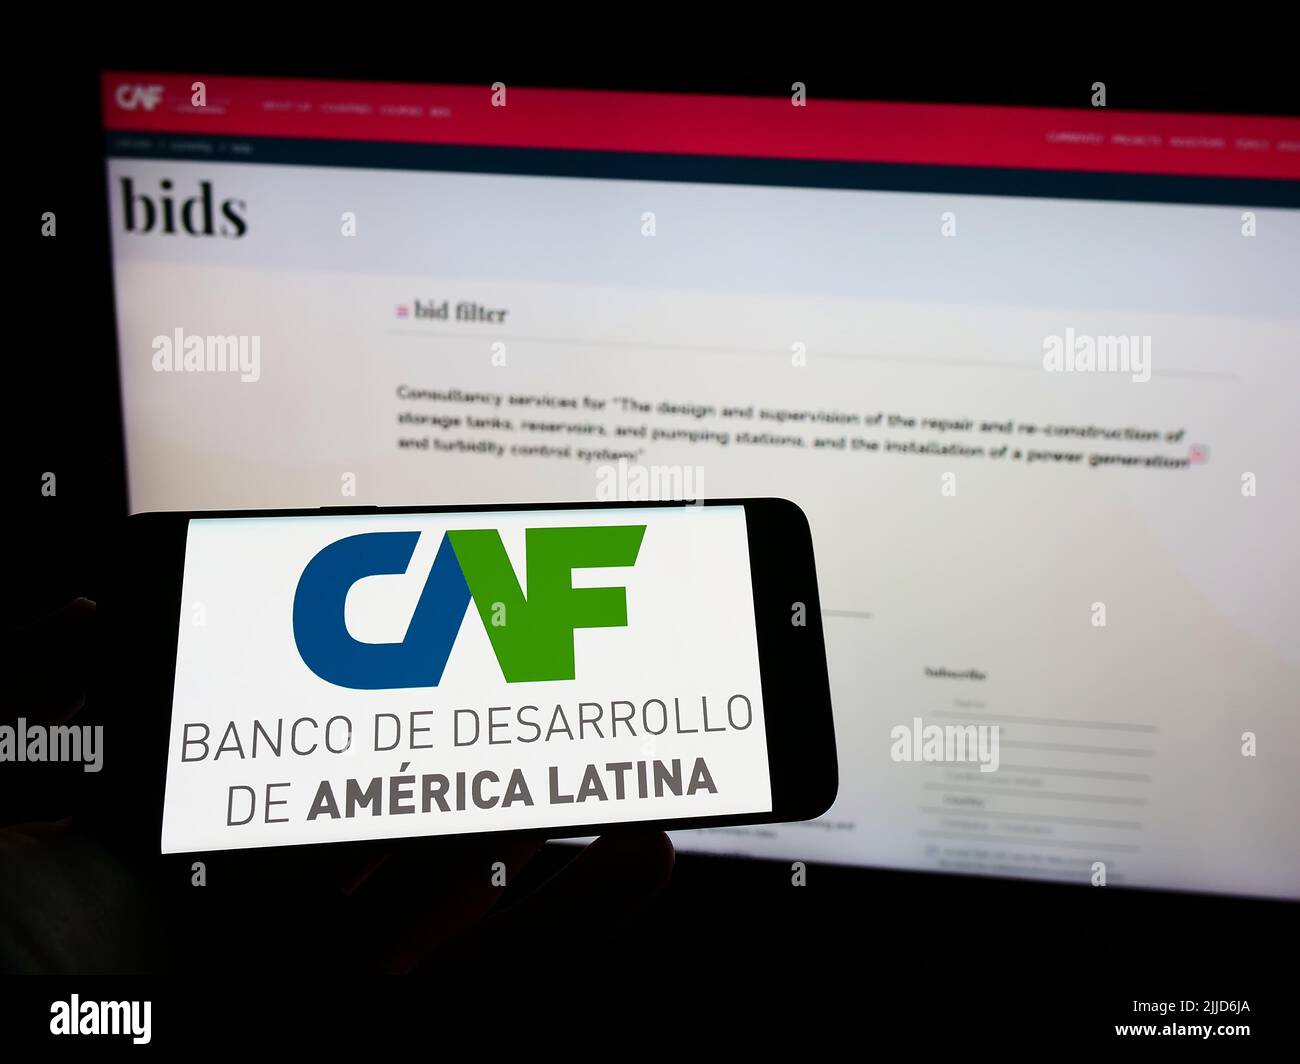 Person holding cellphone with logo of Corporacion Andina de Fomento (CAF) on screen in front of business webpage. Focus on phone display. Stock Photo